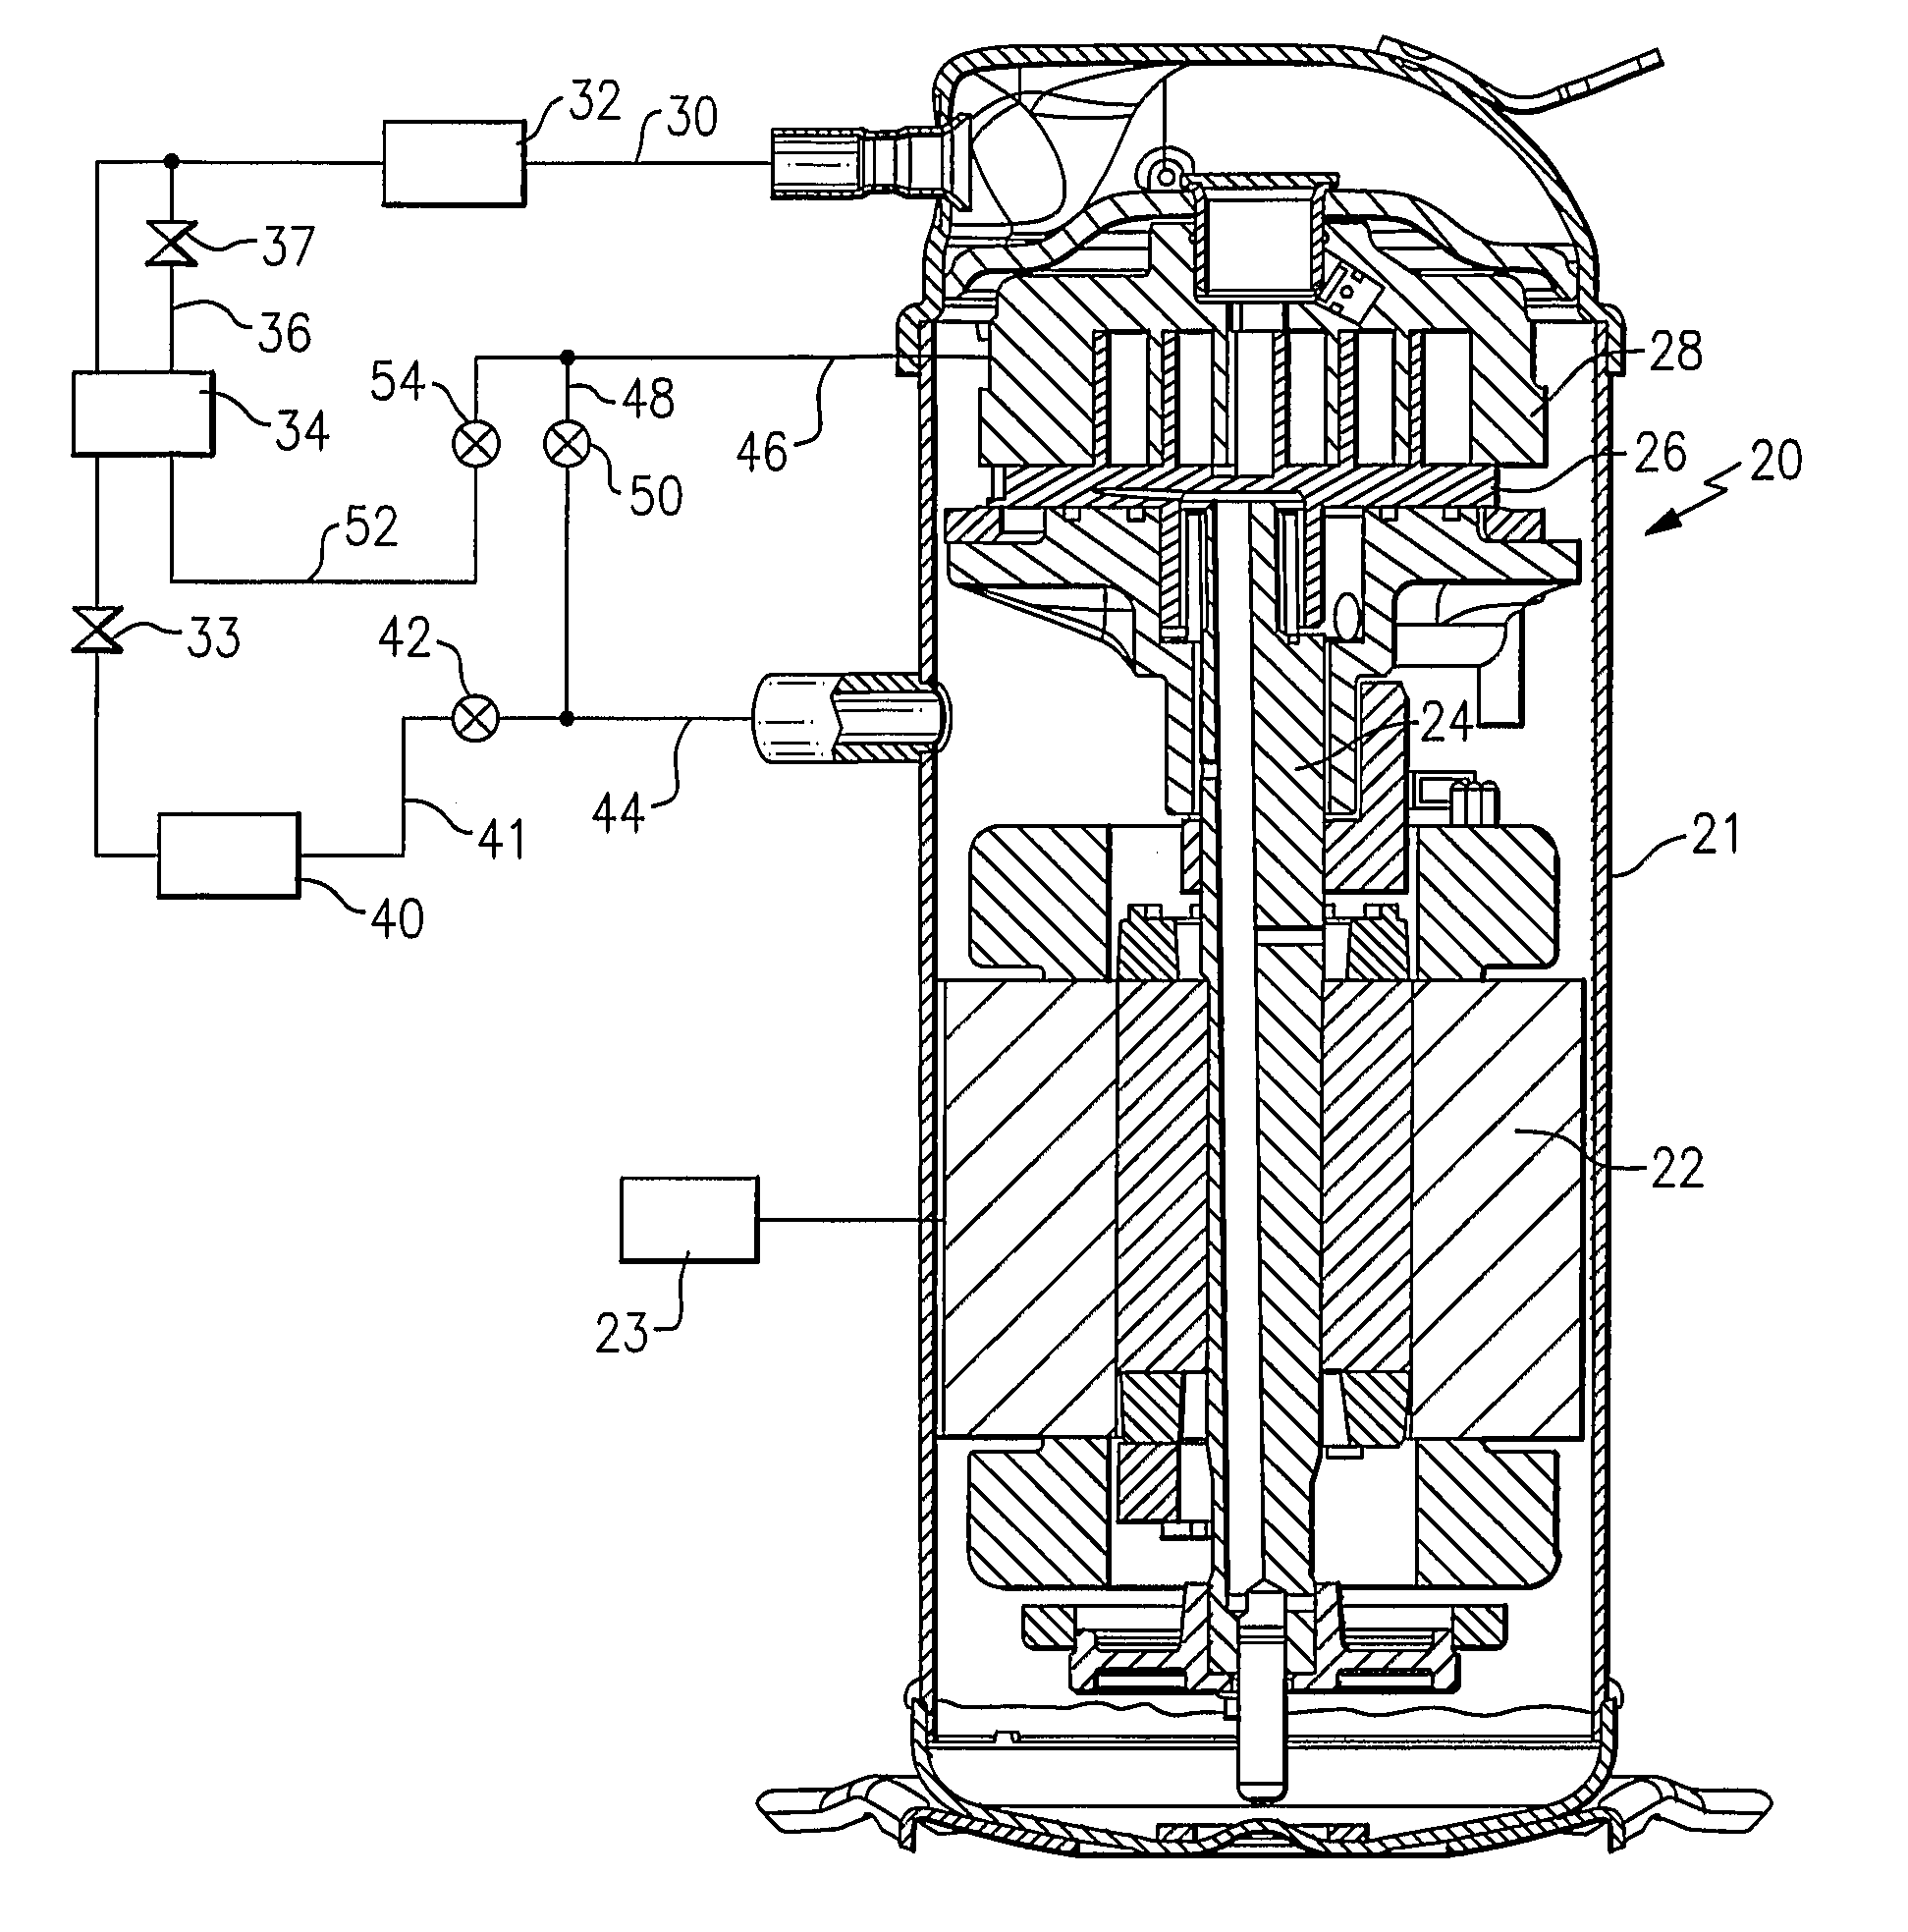 Refrigerant system with multi-speed pulse width modulated compressor